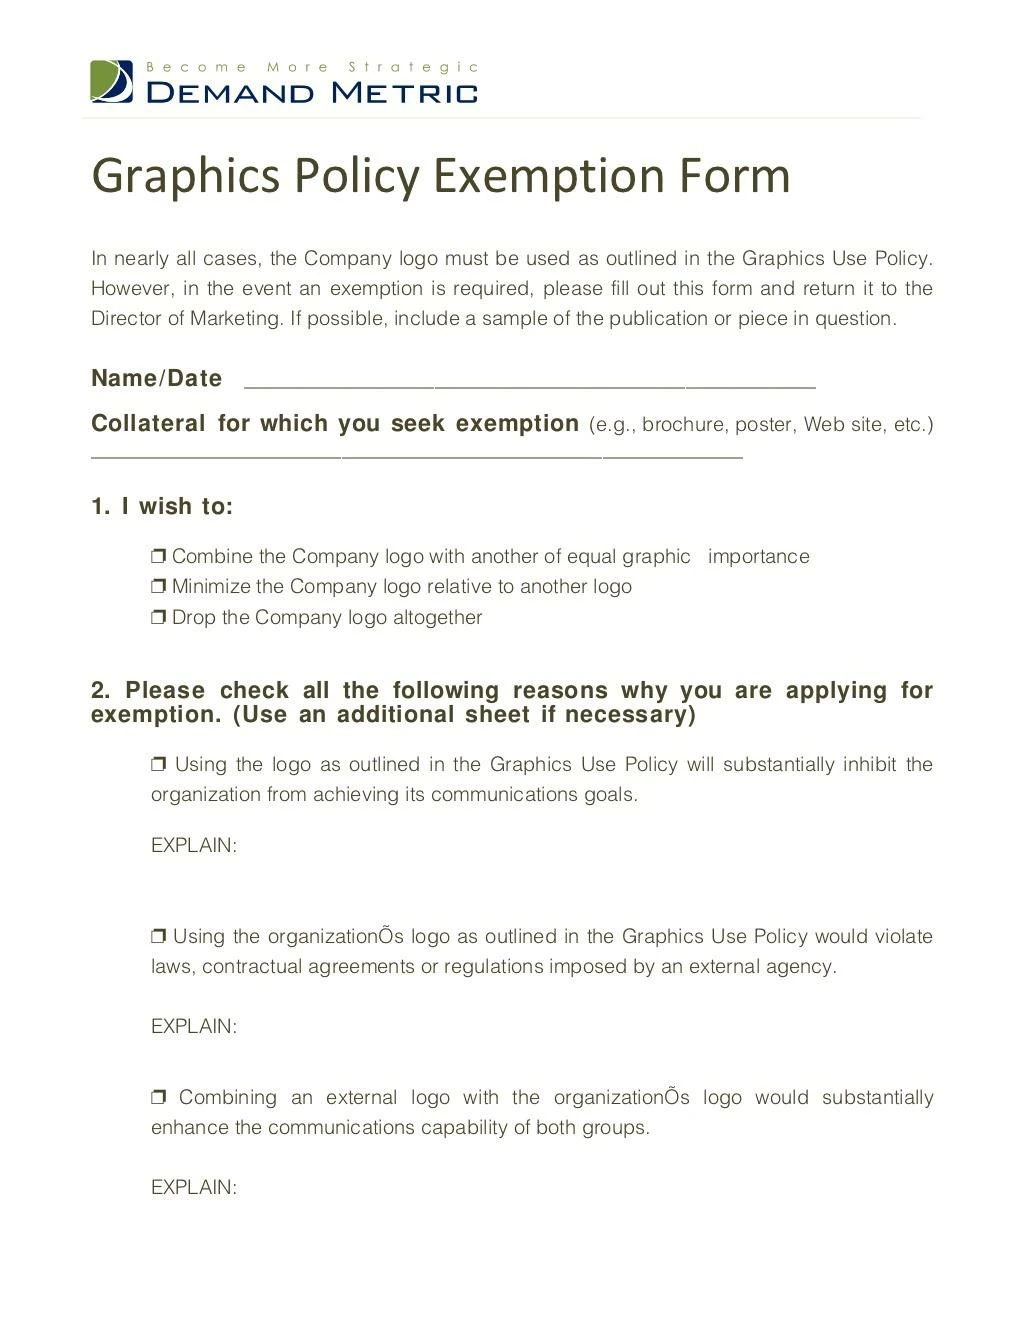 graphic use exemption form